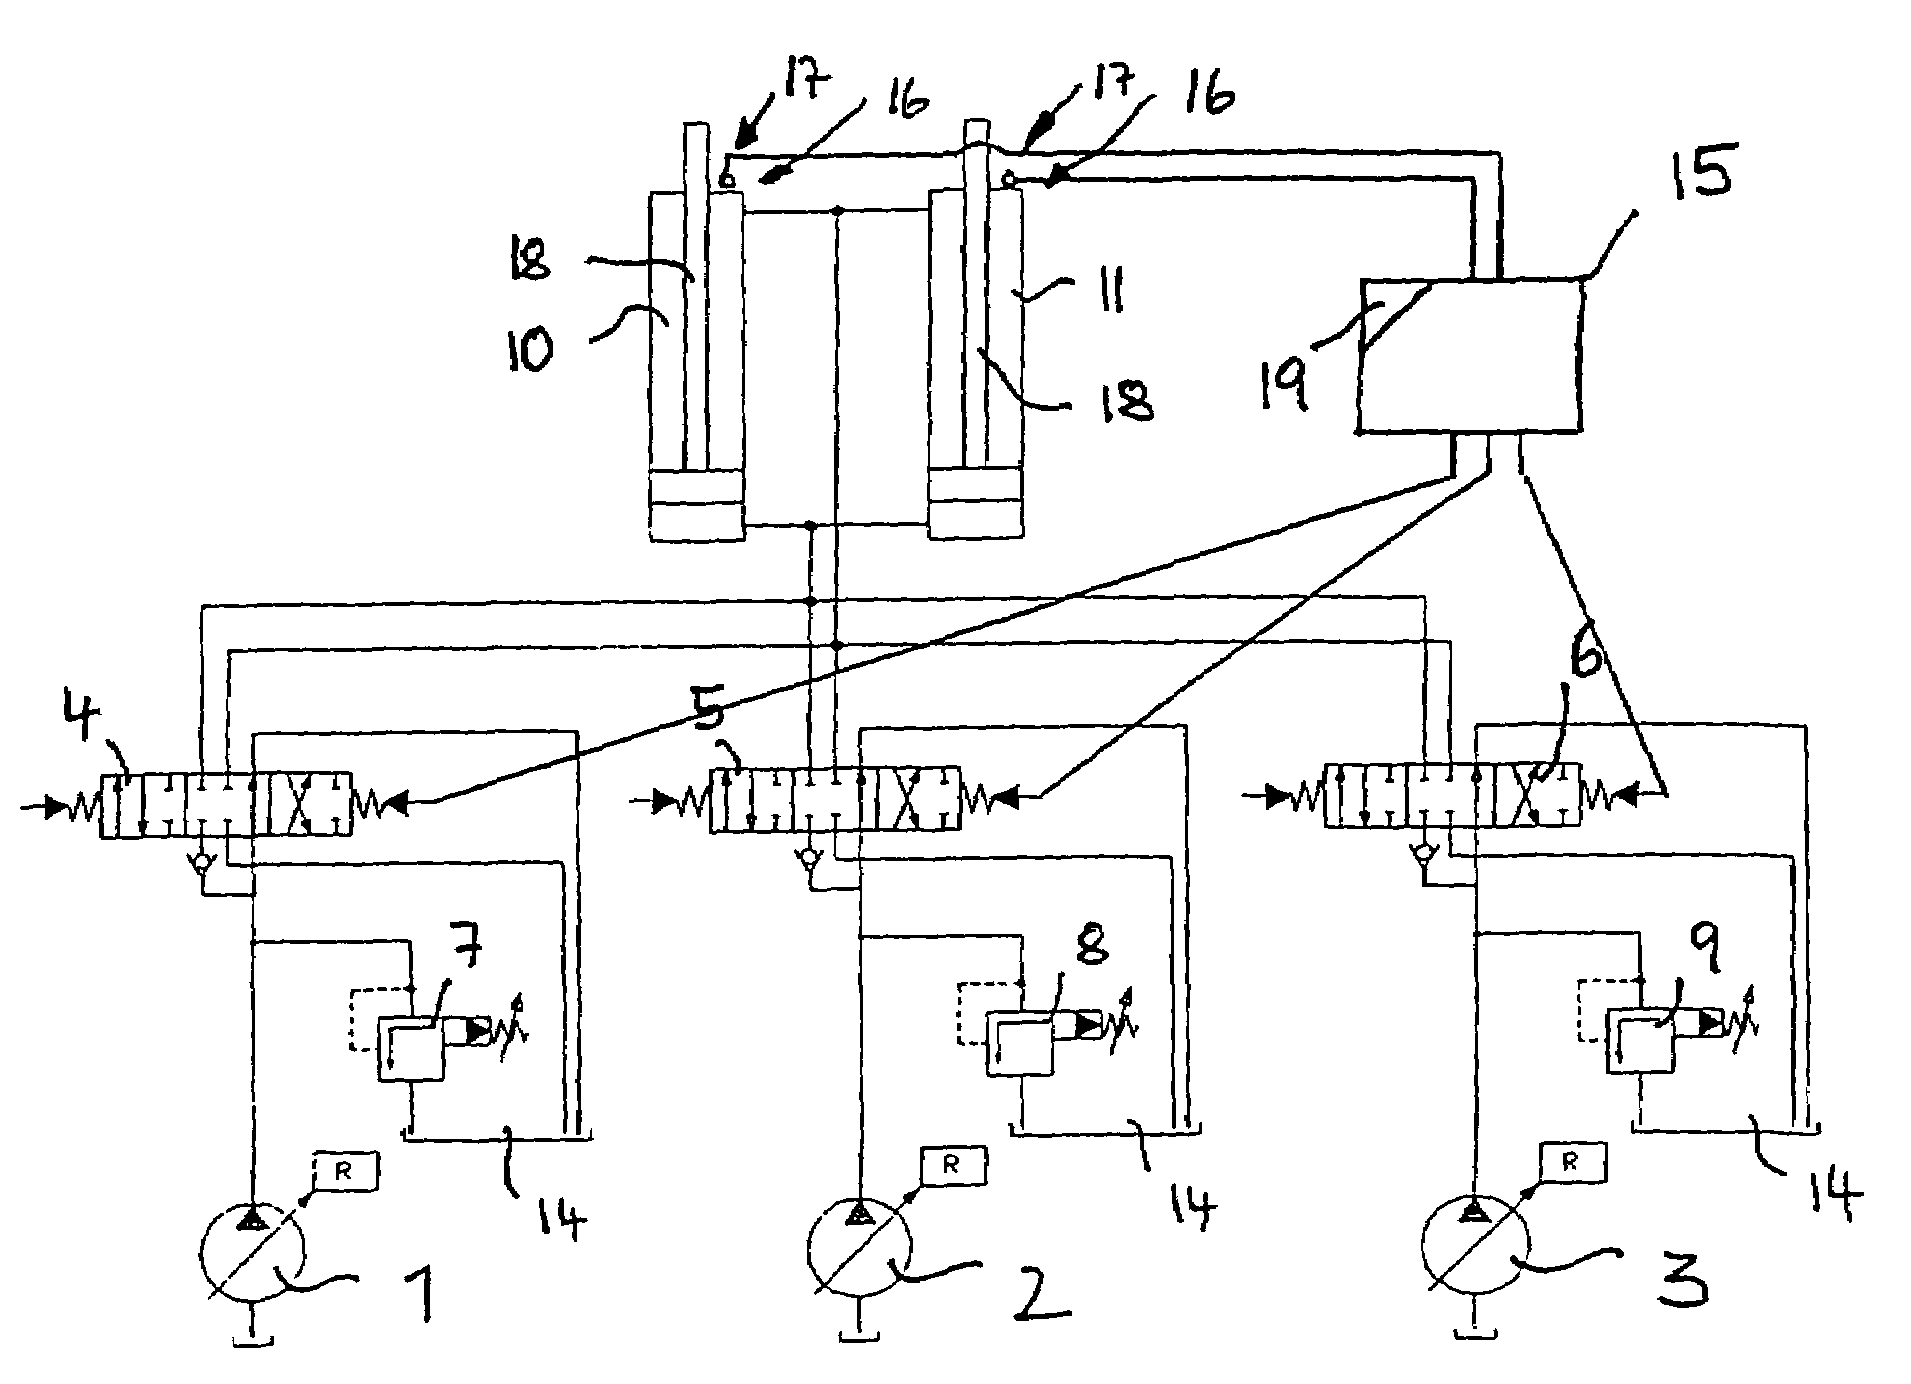 Method and device for attenuating the motion of hydraulic cylinders of mobile work machinery